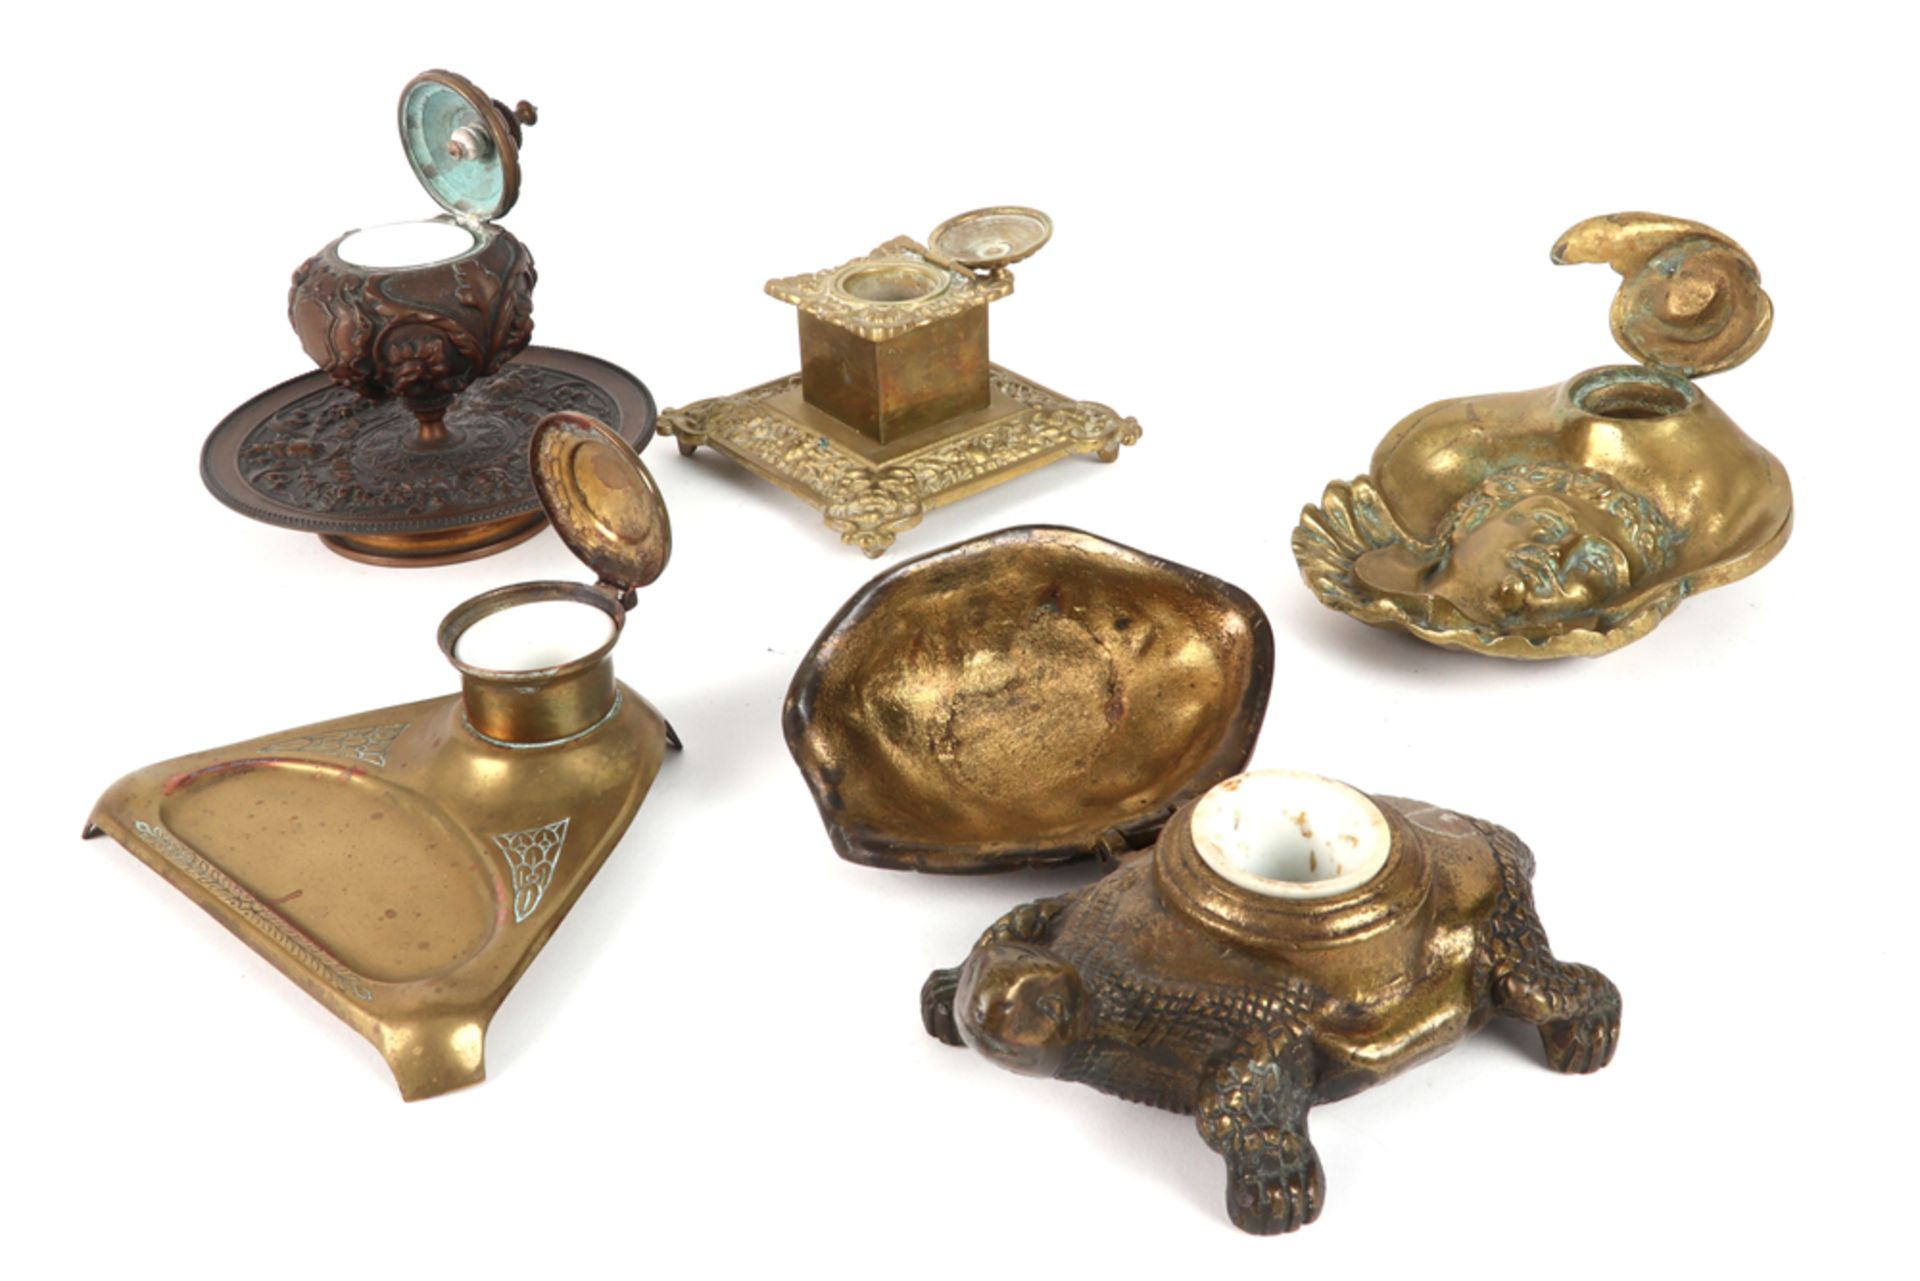 five antique and old bronze inkstands amongst which a tortoise - Image 2 of 2